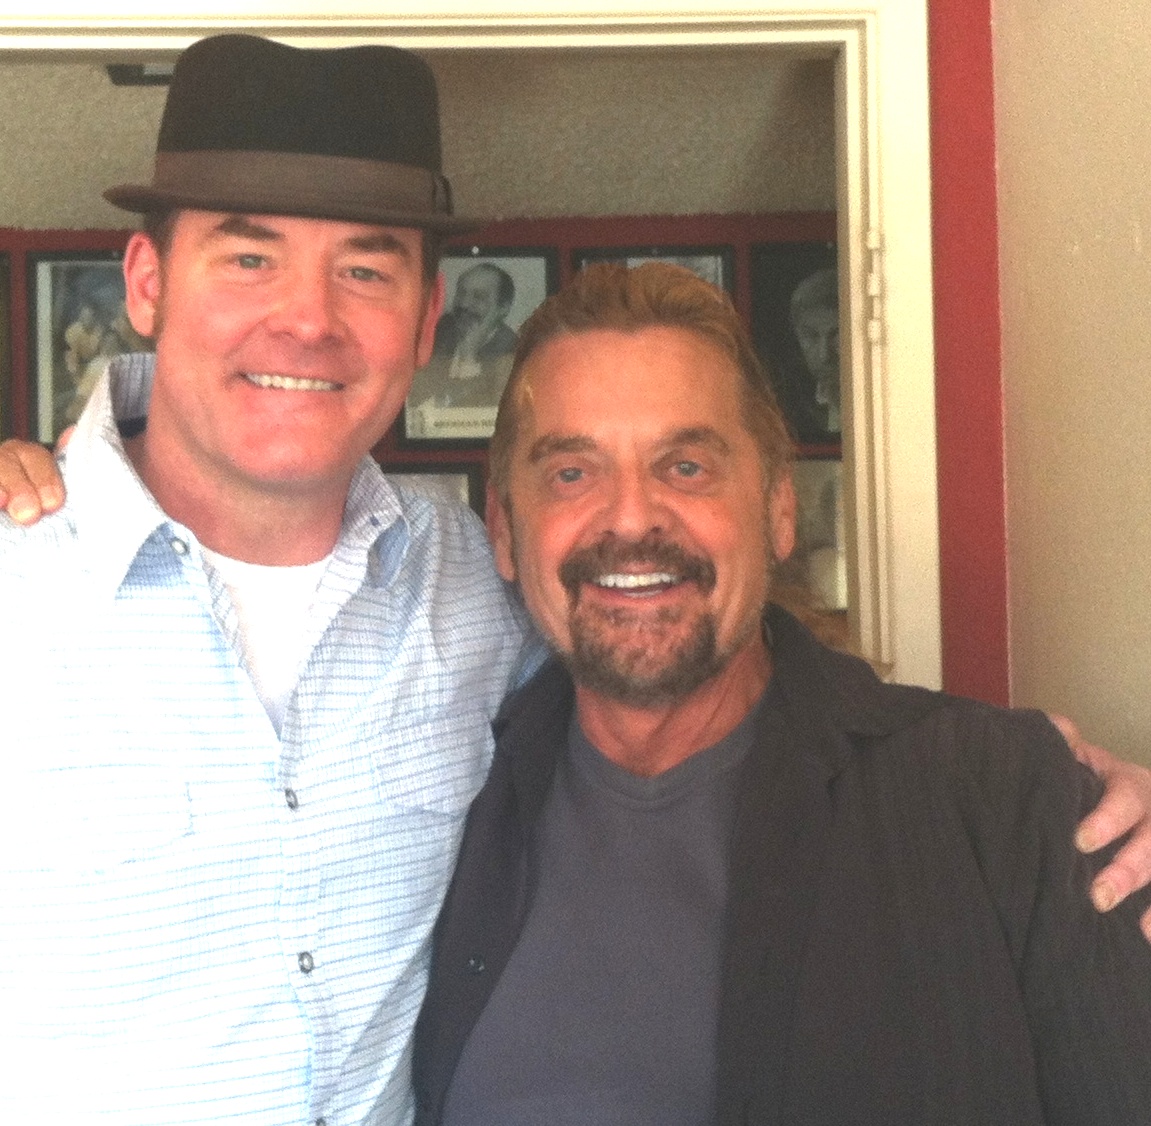 Marc with Anchorman's David Koechner